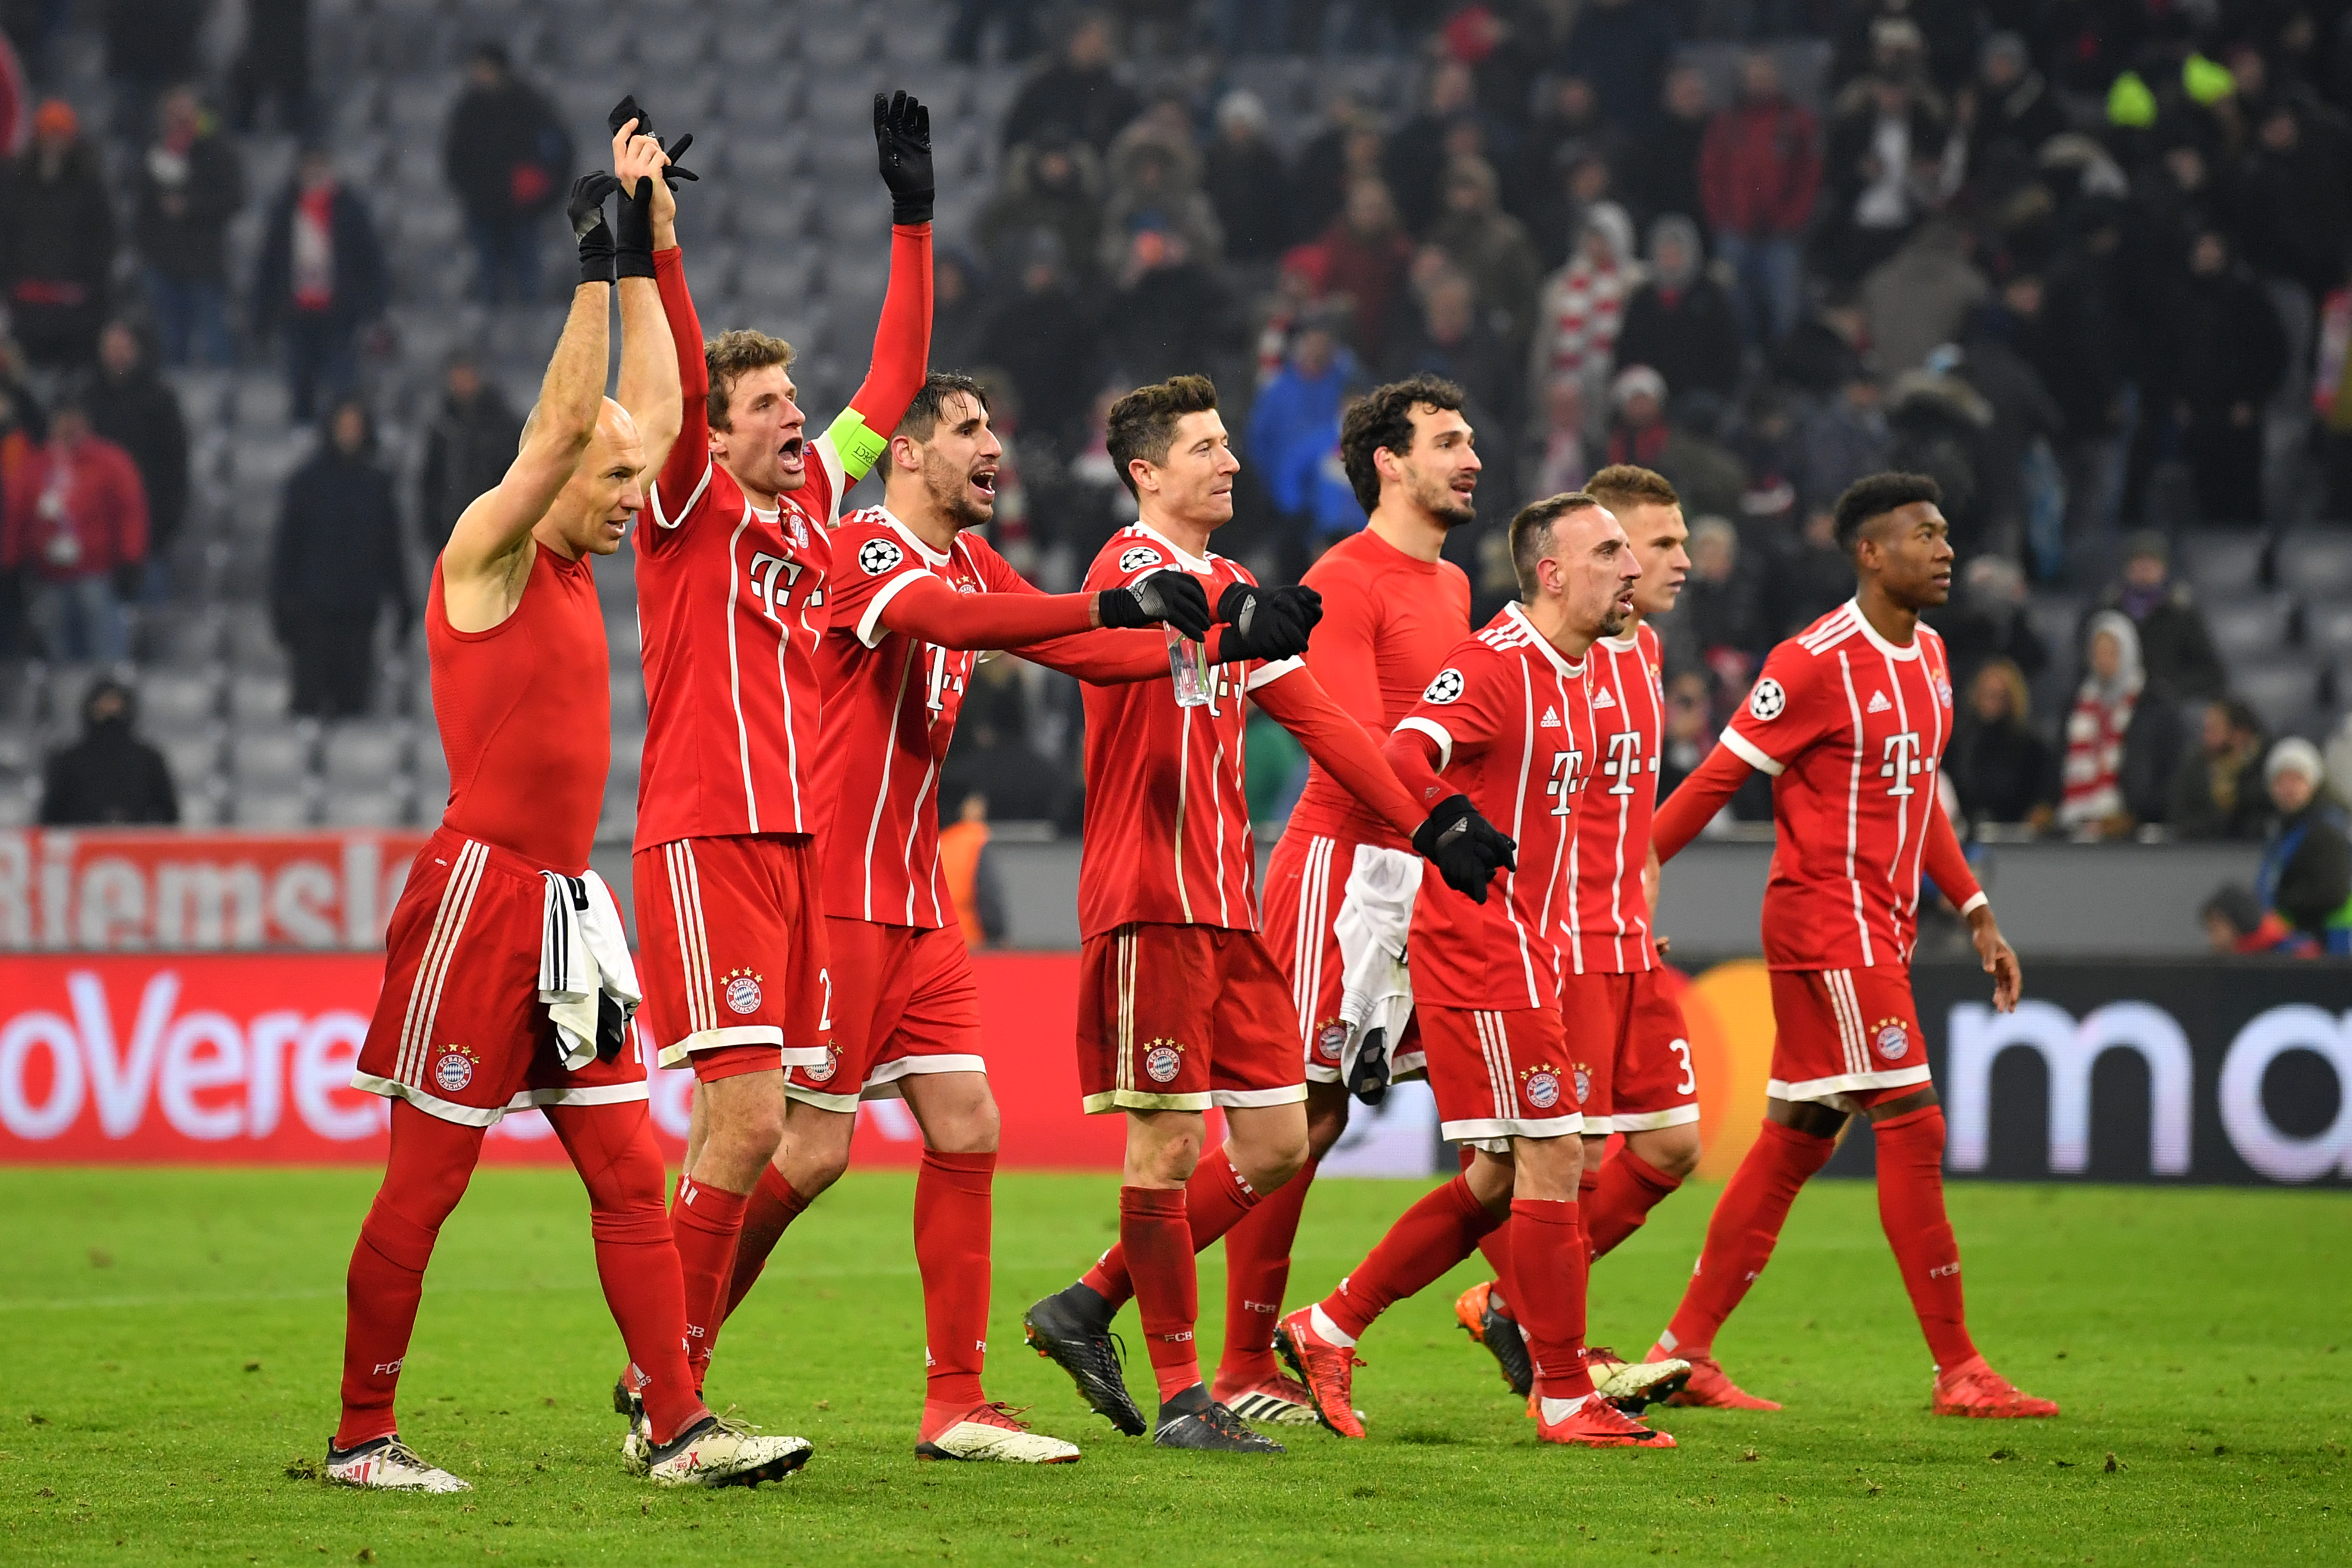 MUNICH, GERMANY - FEBRUARY 20:  The Bayern Muenchen players show their fans appreciation after the UEFA Champions League Round of 16 First Leg  match between Bayern Muenchen and Besiktas at Allianz Arena on February 20, 2018 in Munich, Germany.  (Photo by Sebastian Widmann/Bongarts/Getty Images)